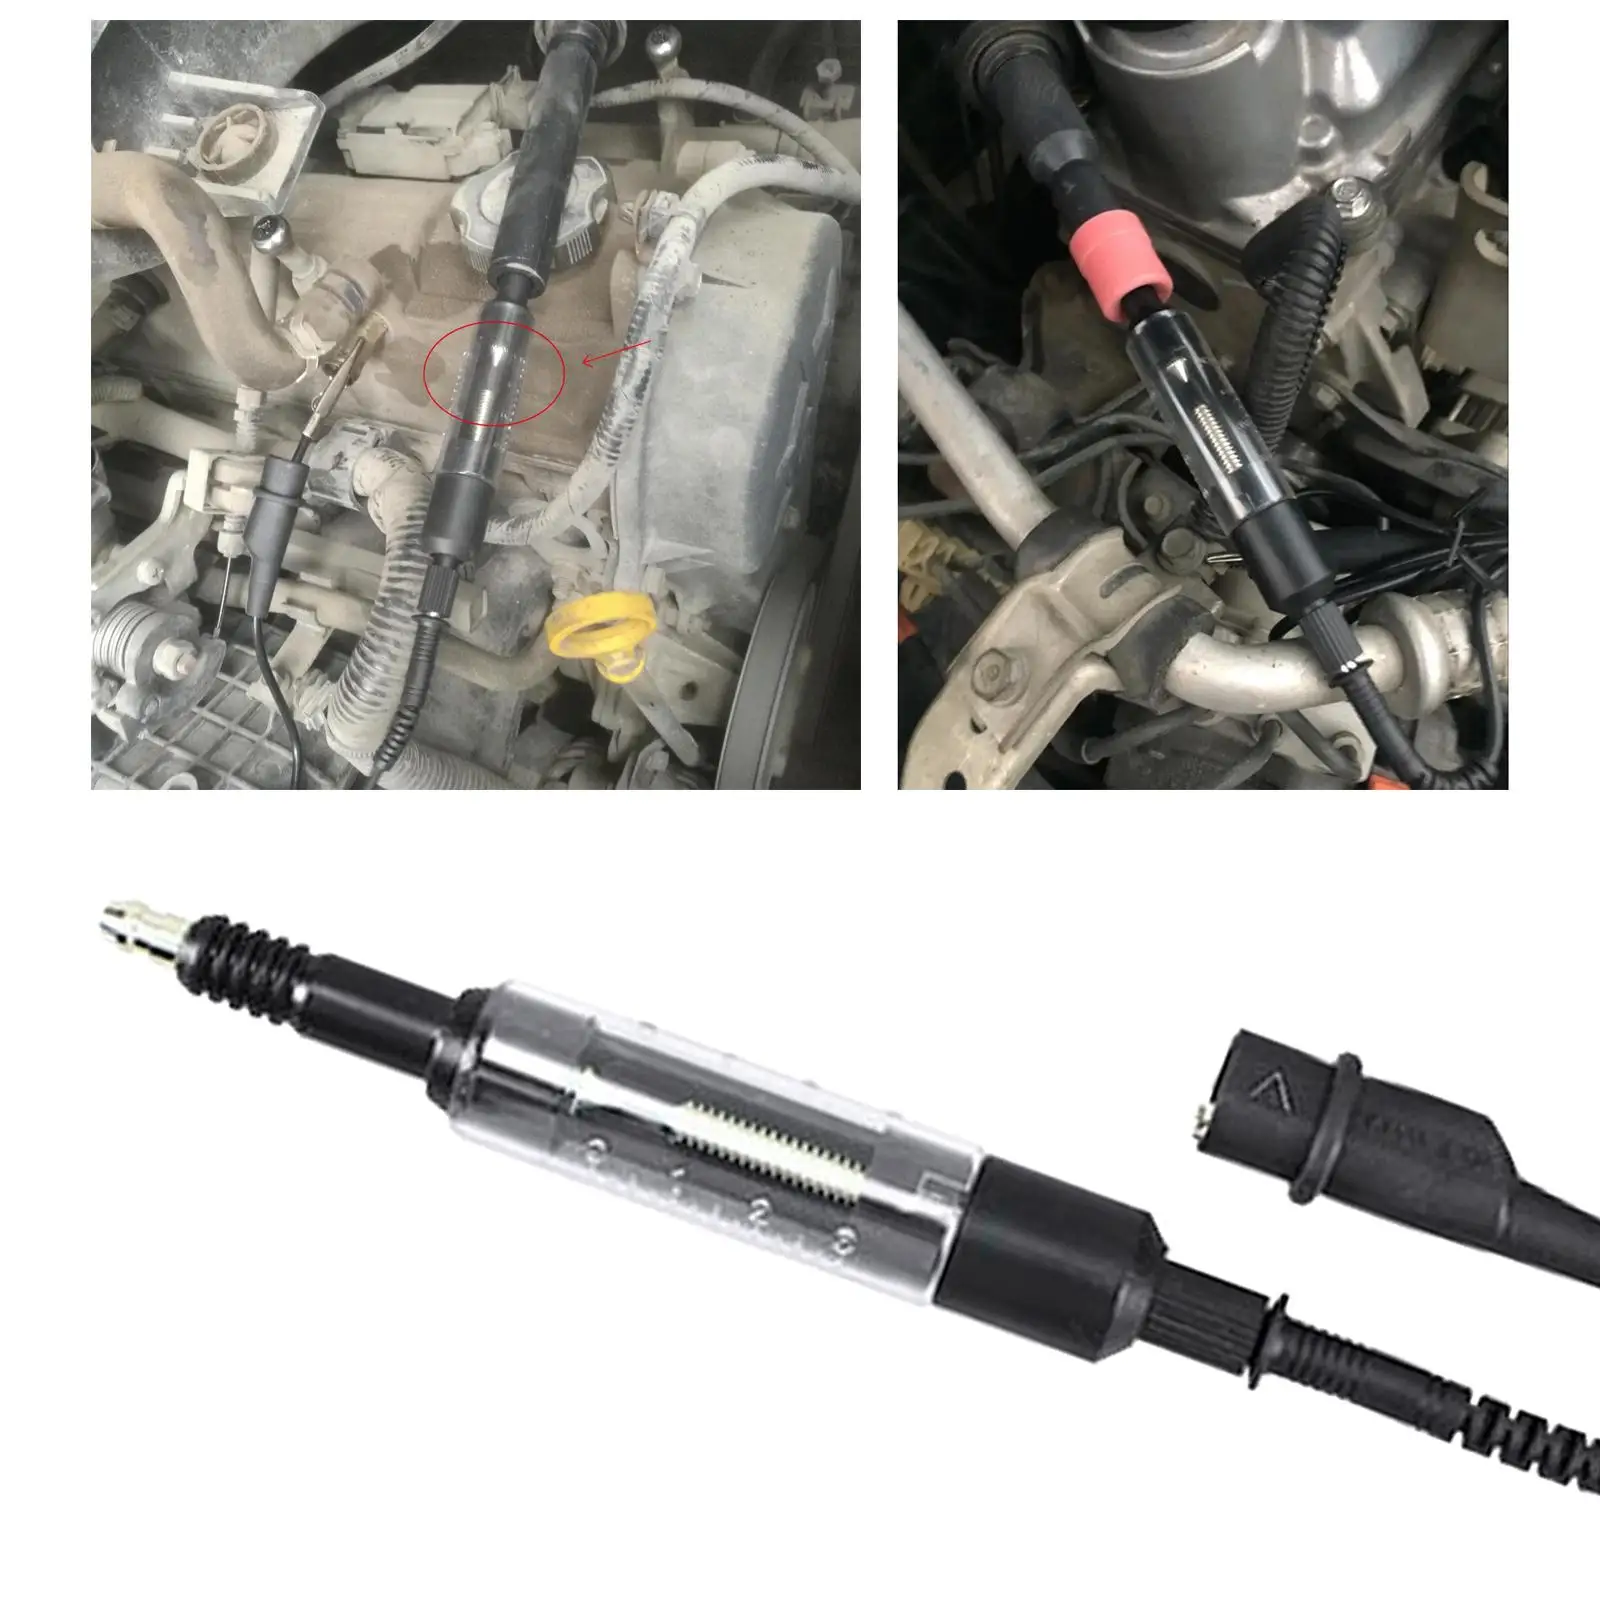 Spark Plug , Ignition Coil   Fixing  Internal/External Engines